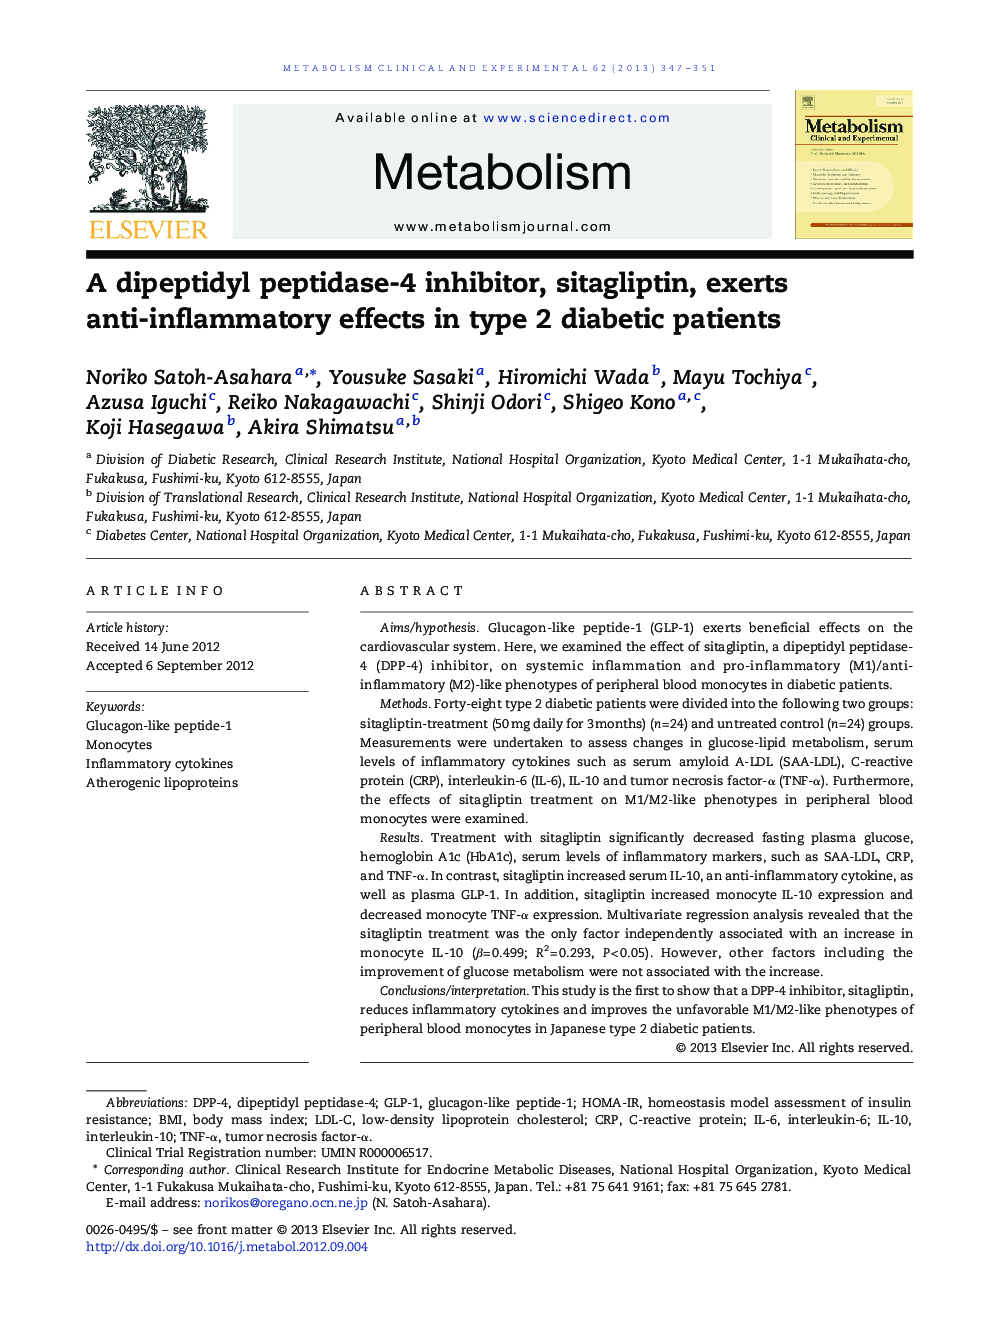 A dipeptidyl peptidase-4 inhibitor, sitagliptin, exerts anti-inflammatory effects in type 2 diabetic patients 